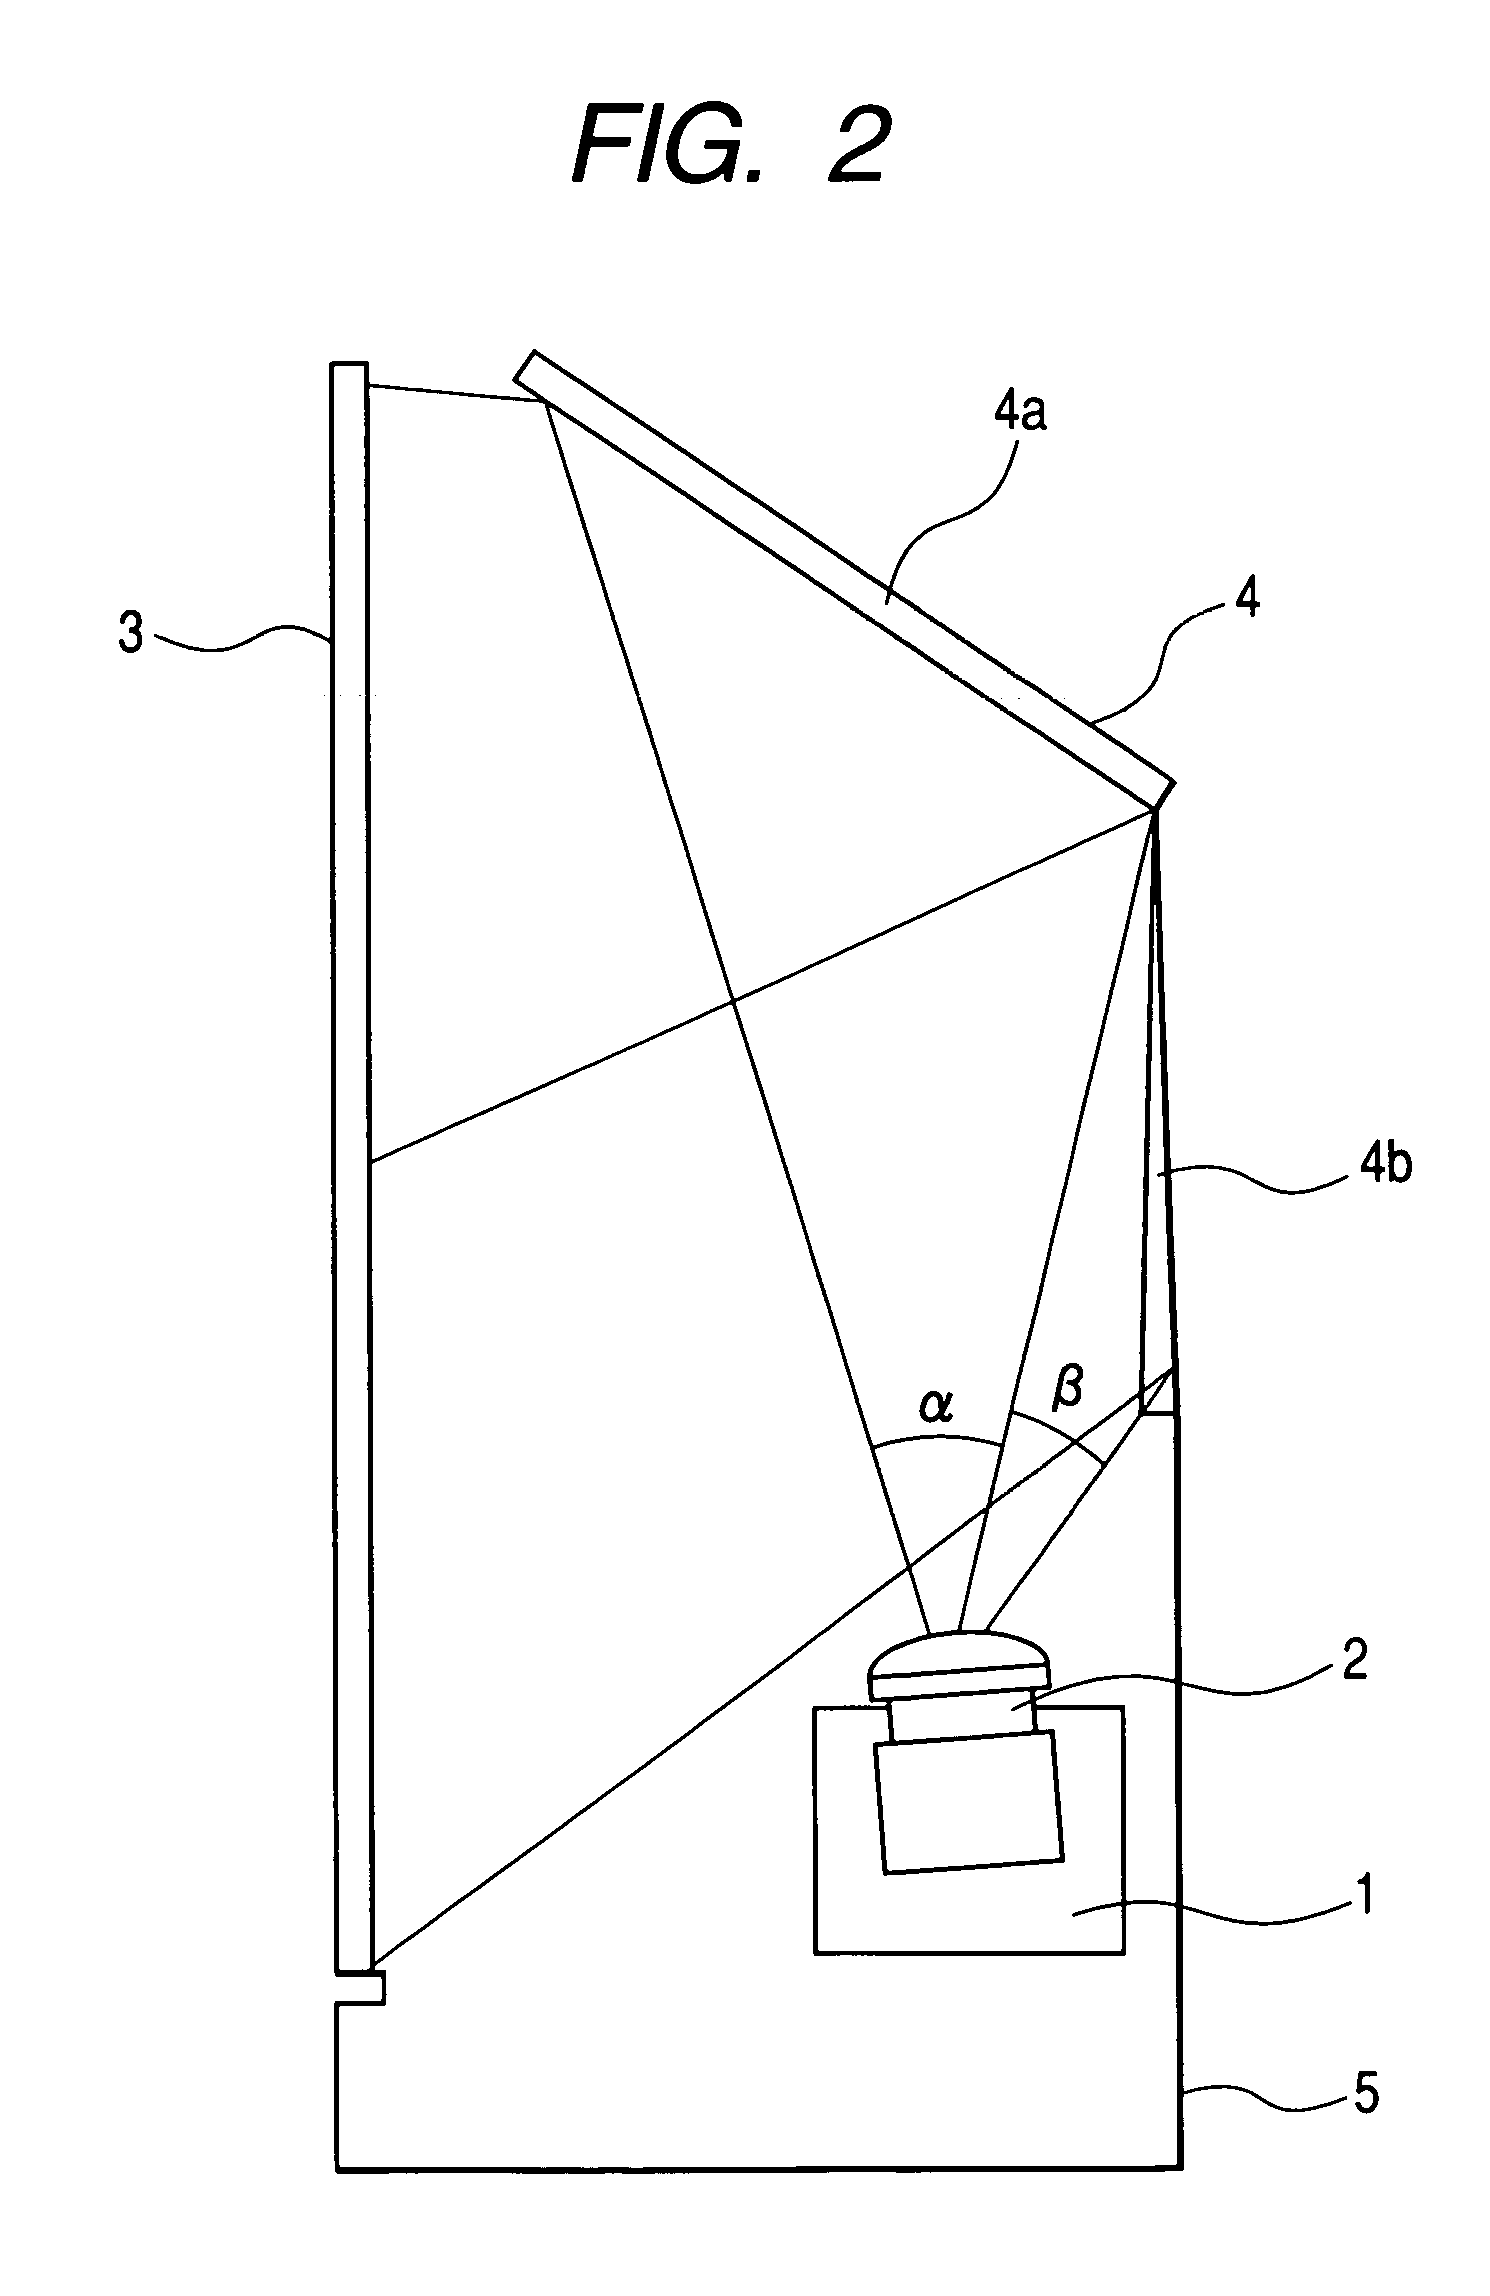 Image display apparatus, and transmissive screen and reflecting mirror used for same